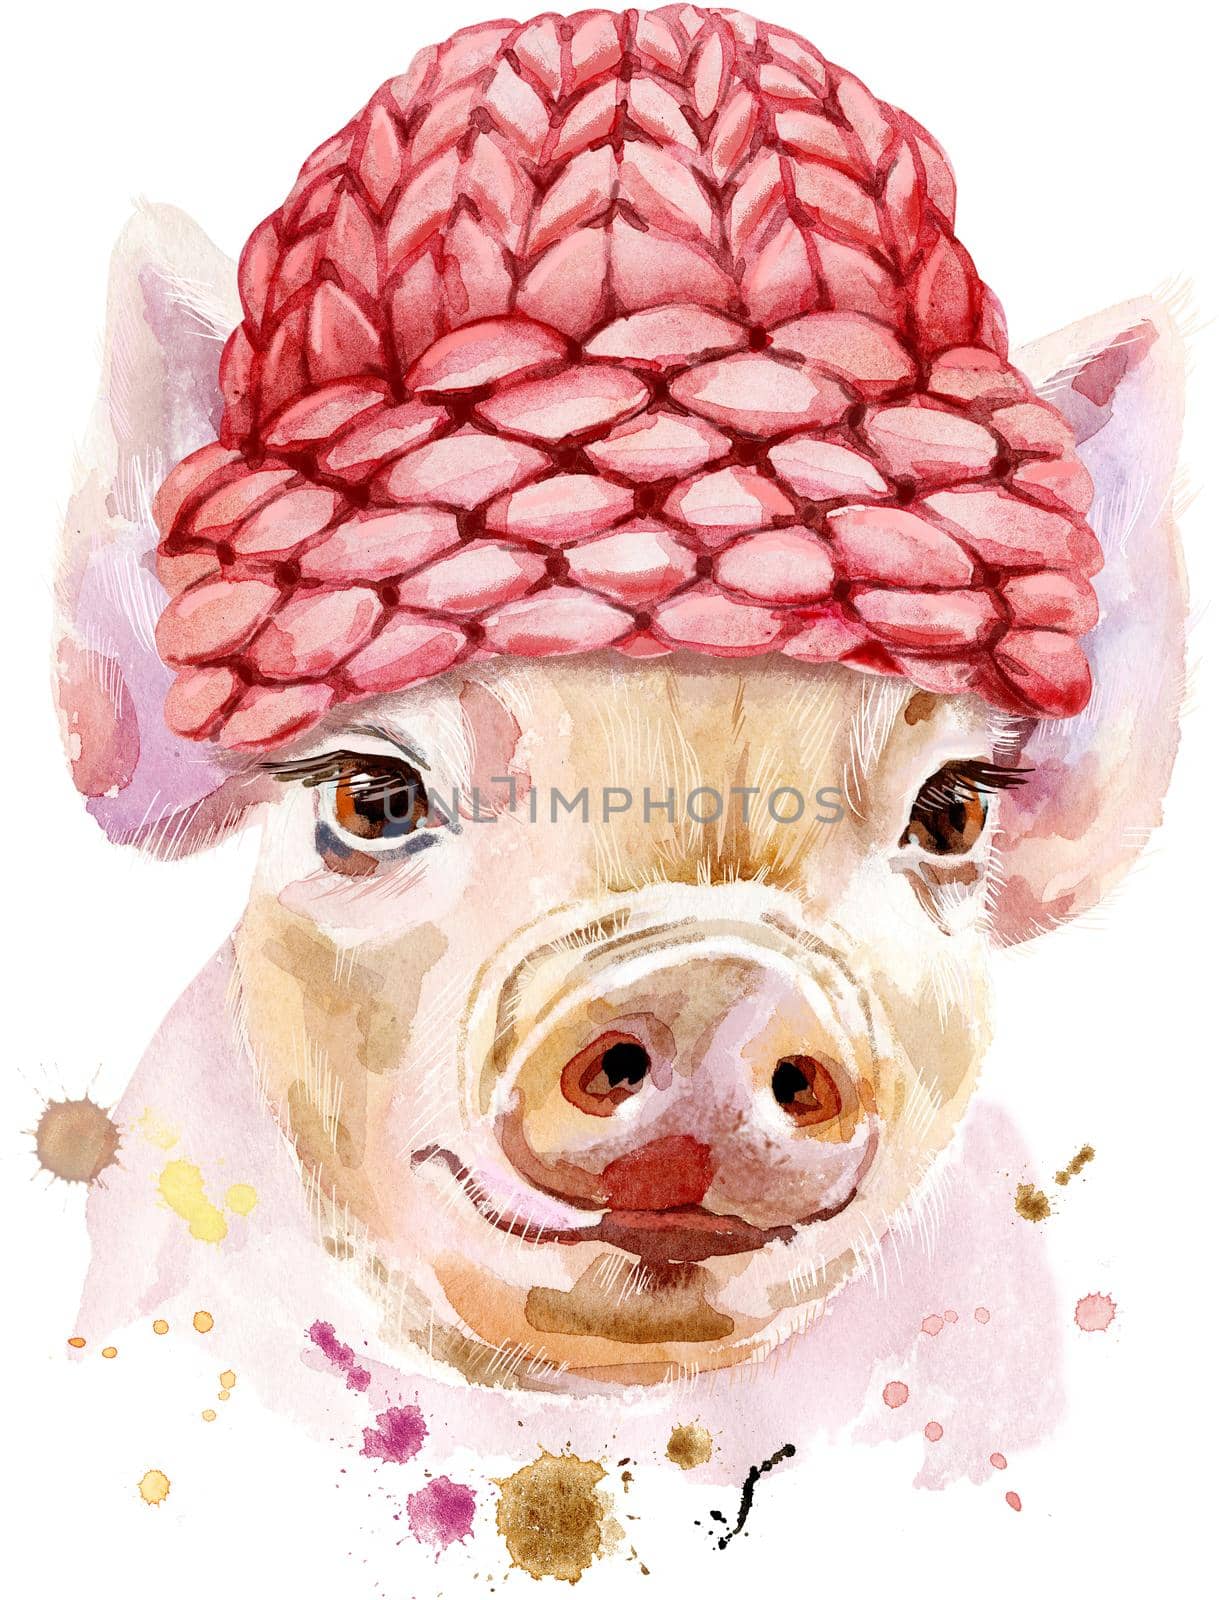 Cute piggy in a knitted hat. Pig for T-shirt graphics. Watercolor pink mini pig illustration